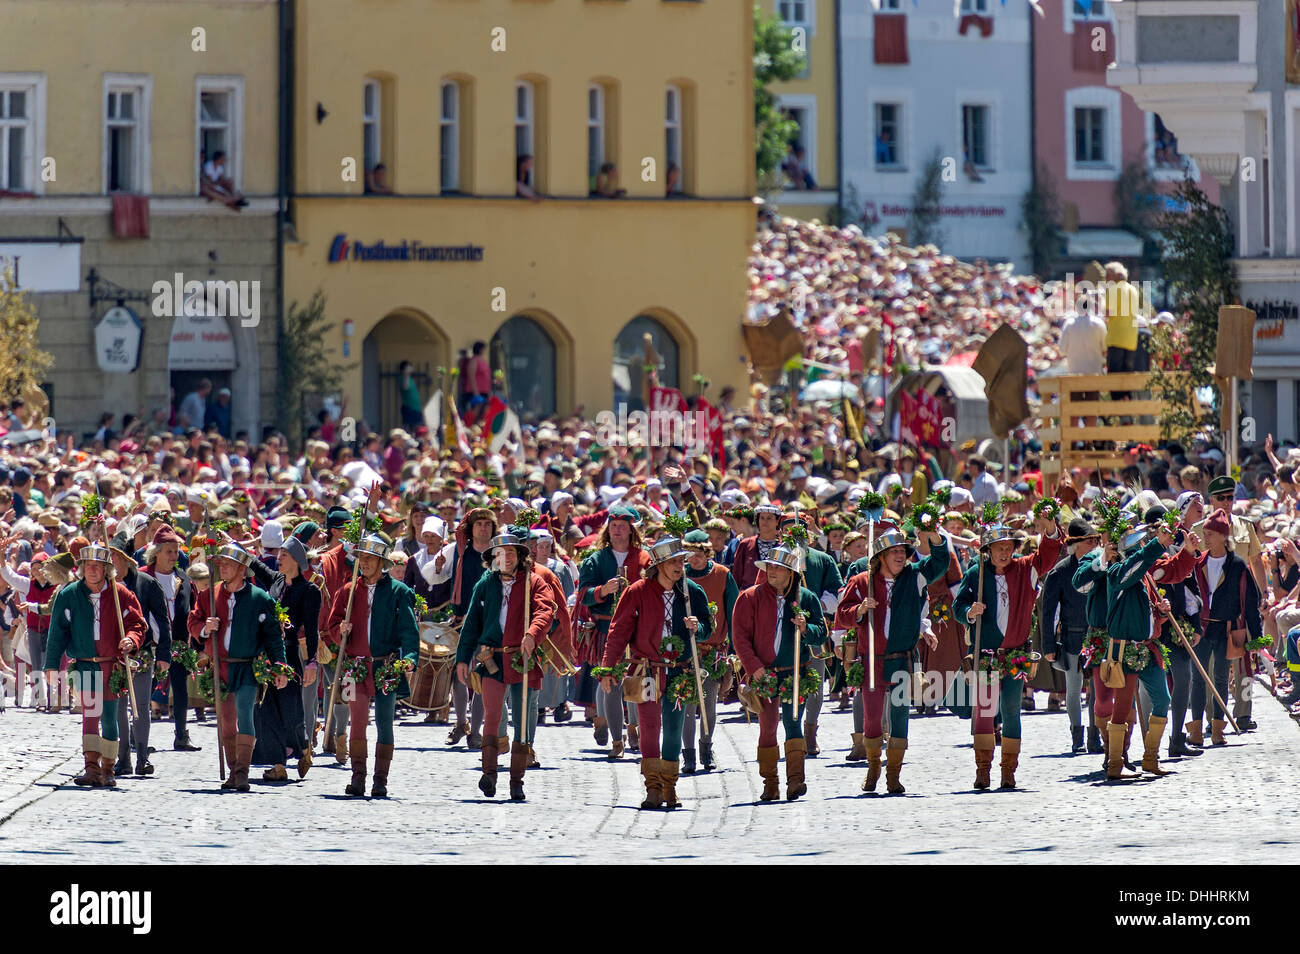 Bailiffs at the front of the wedding procession in medieval costumes to celebrate 'Landshut Wedding 1475', historic center Stock Photo